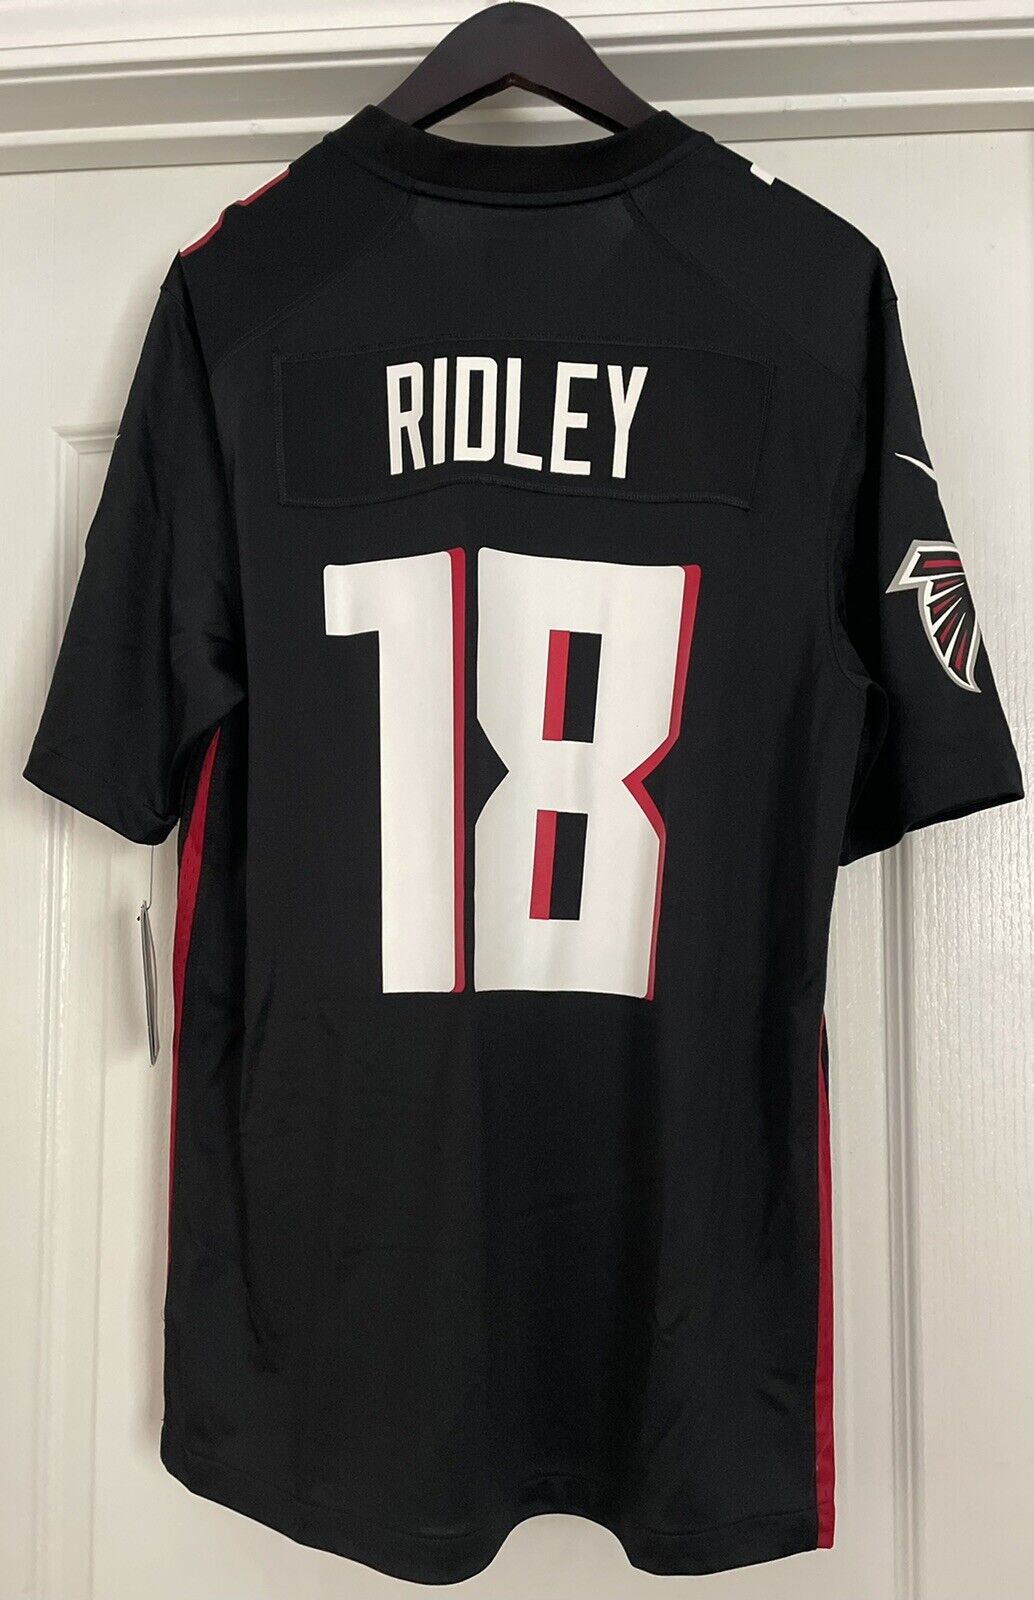 100% Authentic Falcons Calvin Ridley Nike Black Throwback Game Jersey Size XL 48